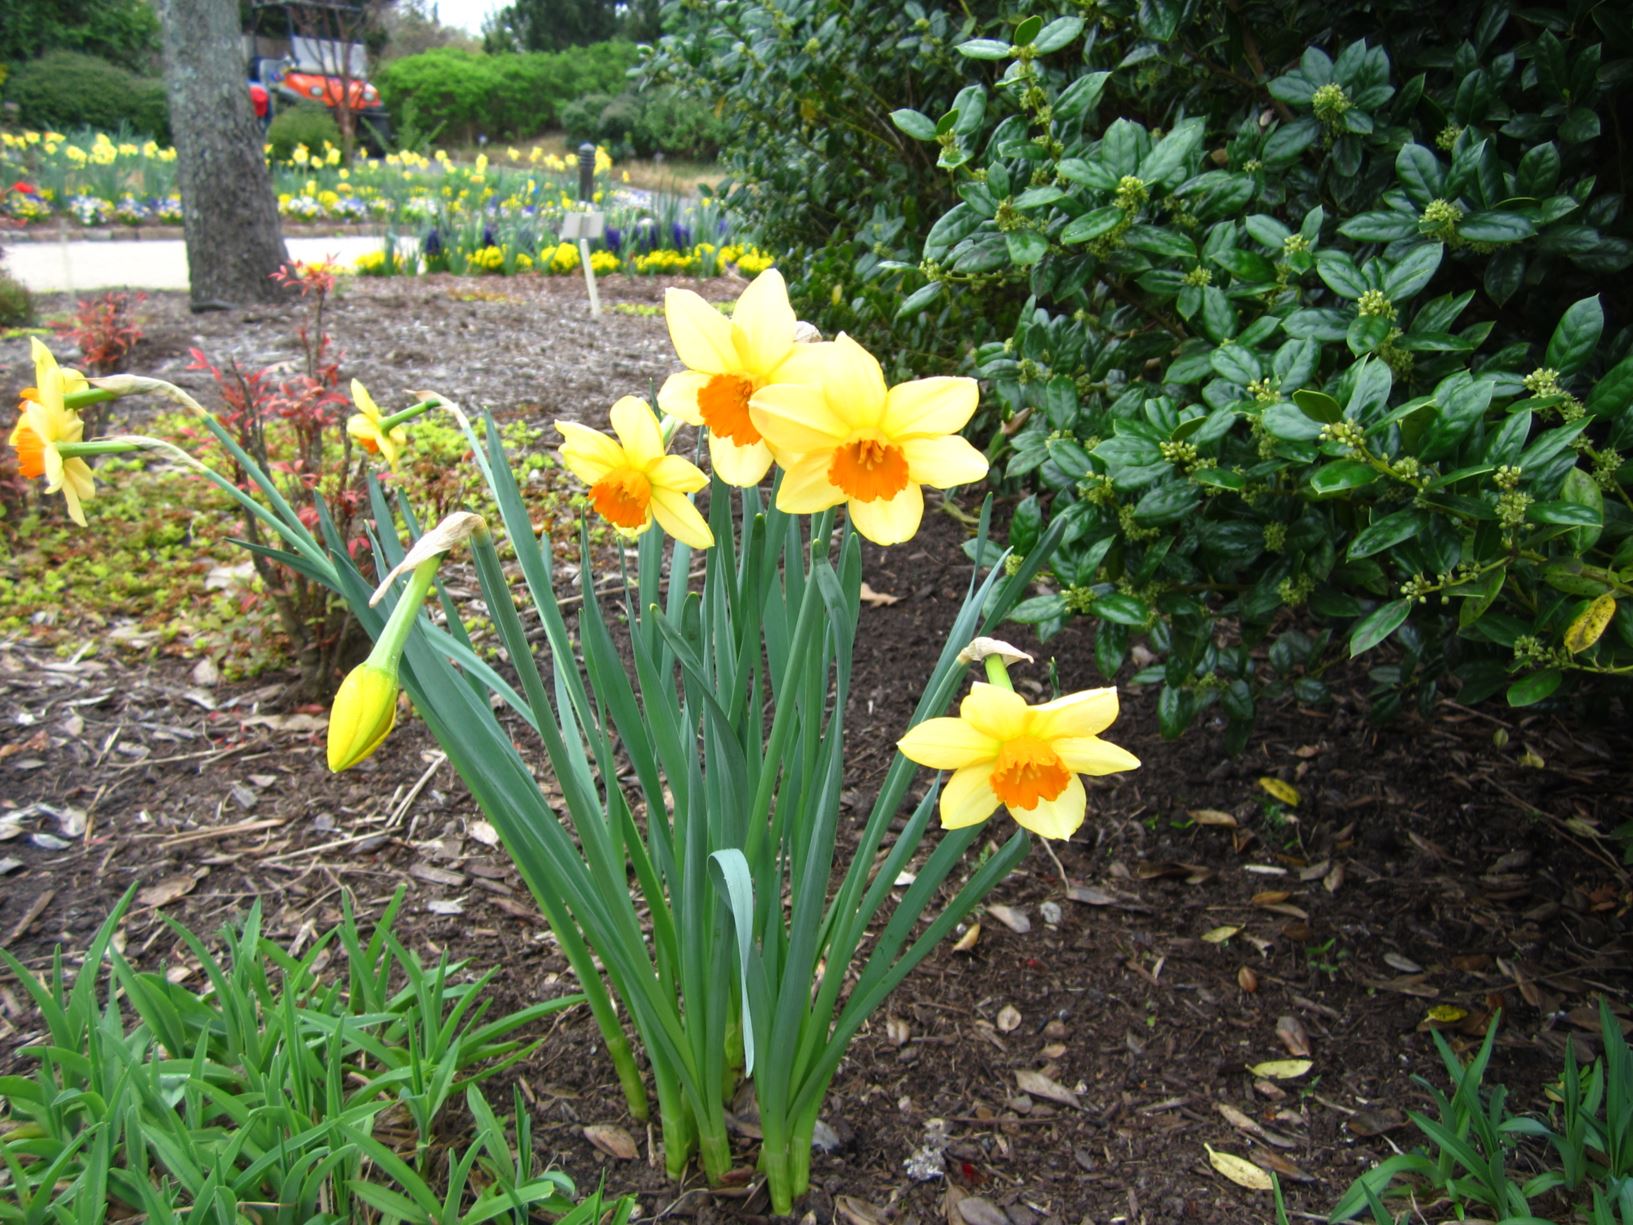 Narcissus 'Ambergate' - large-cupped daffodil